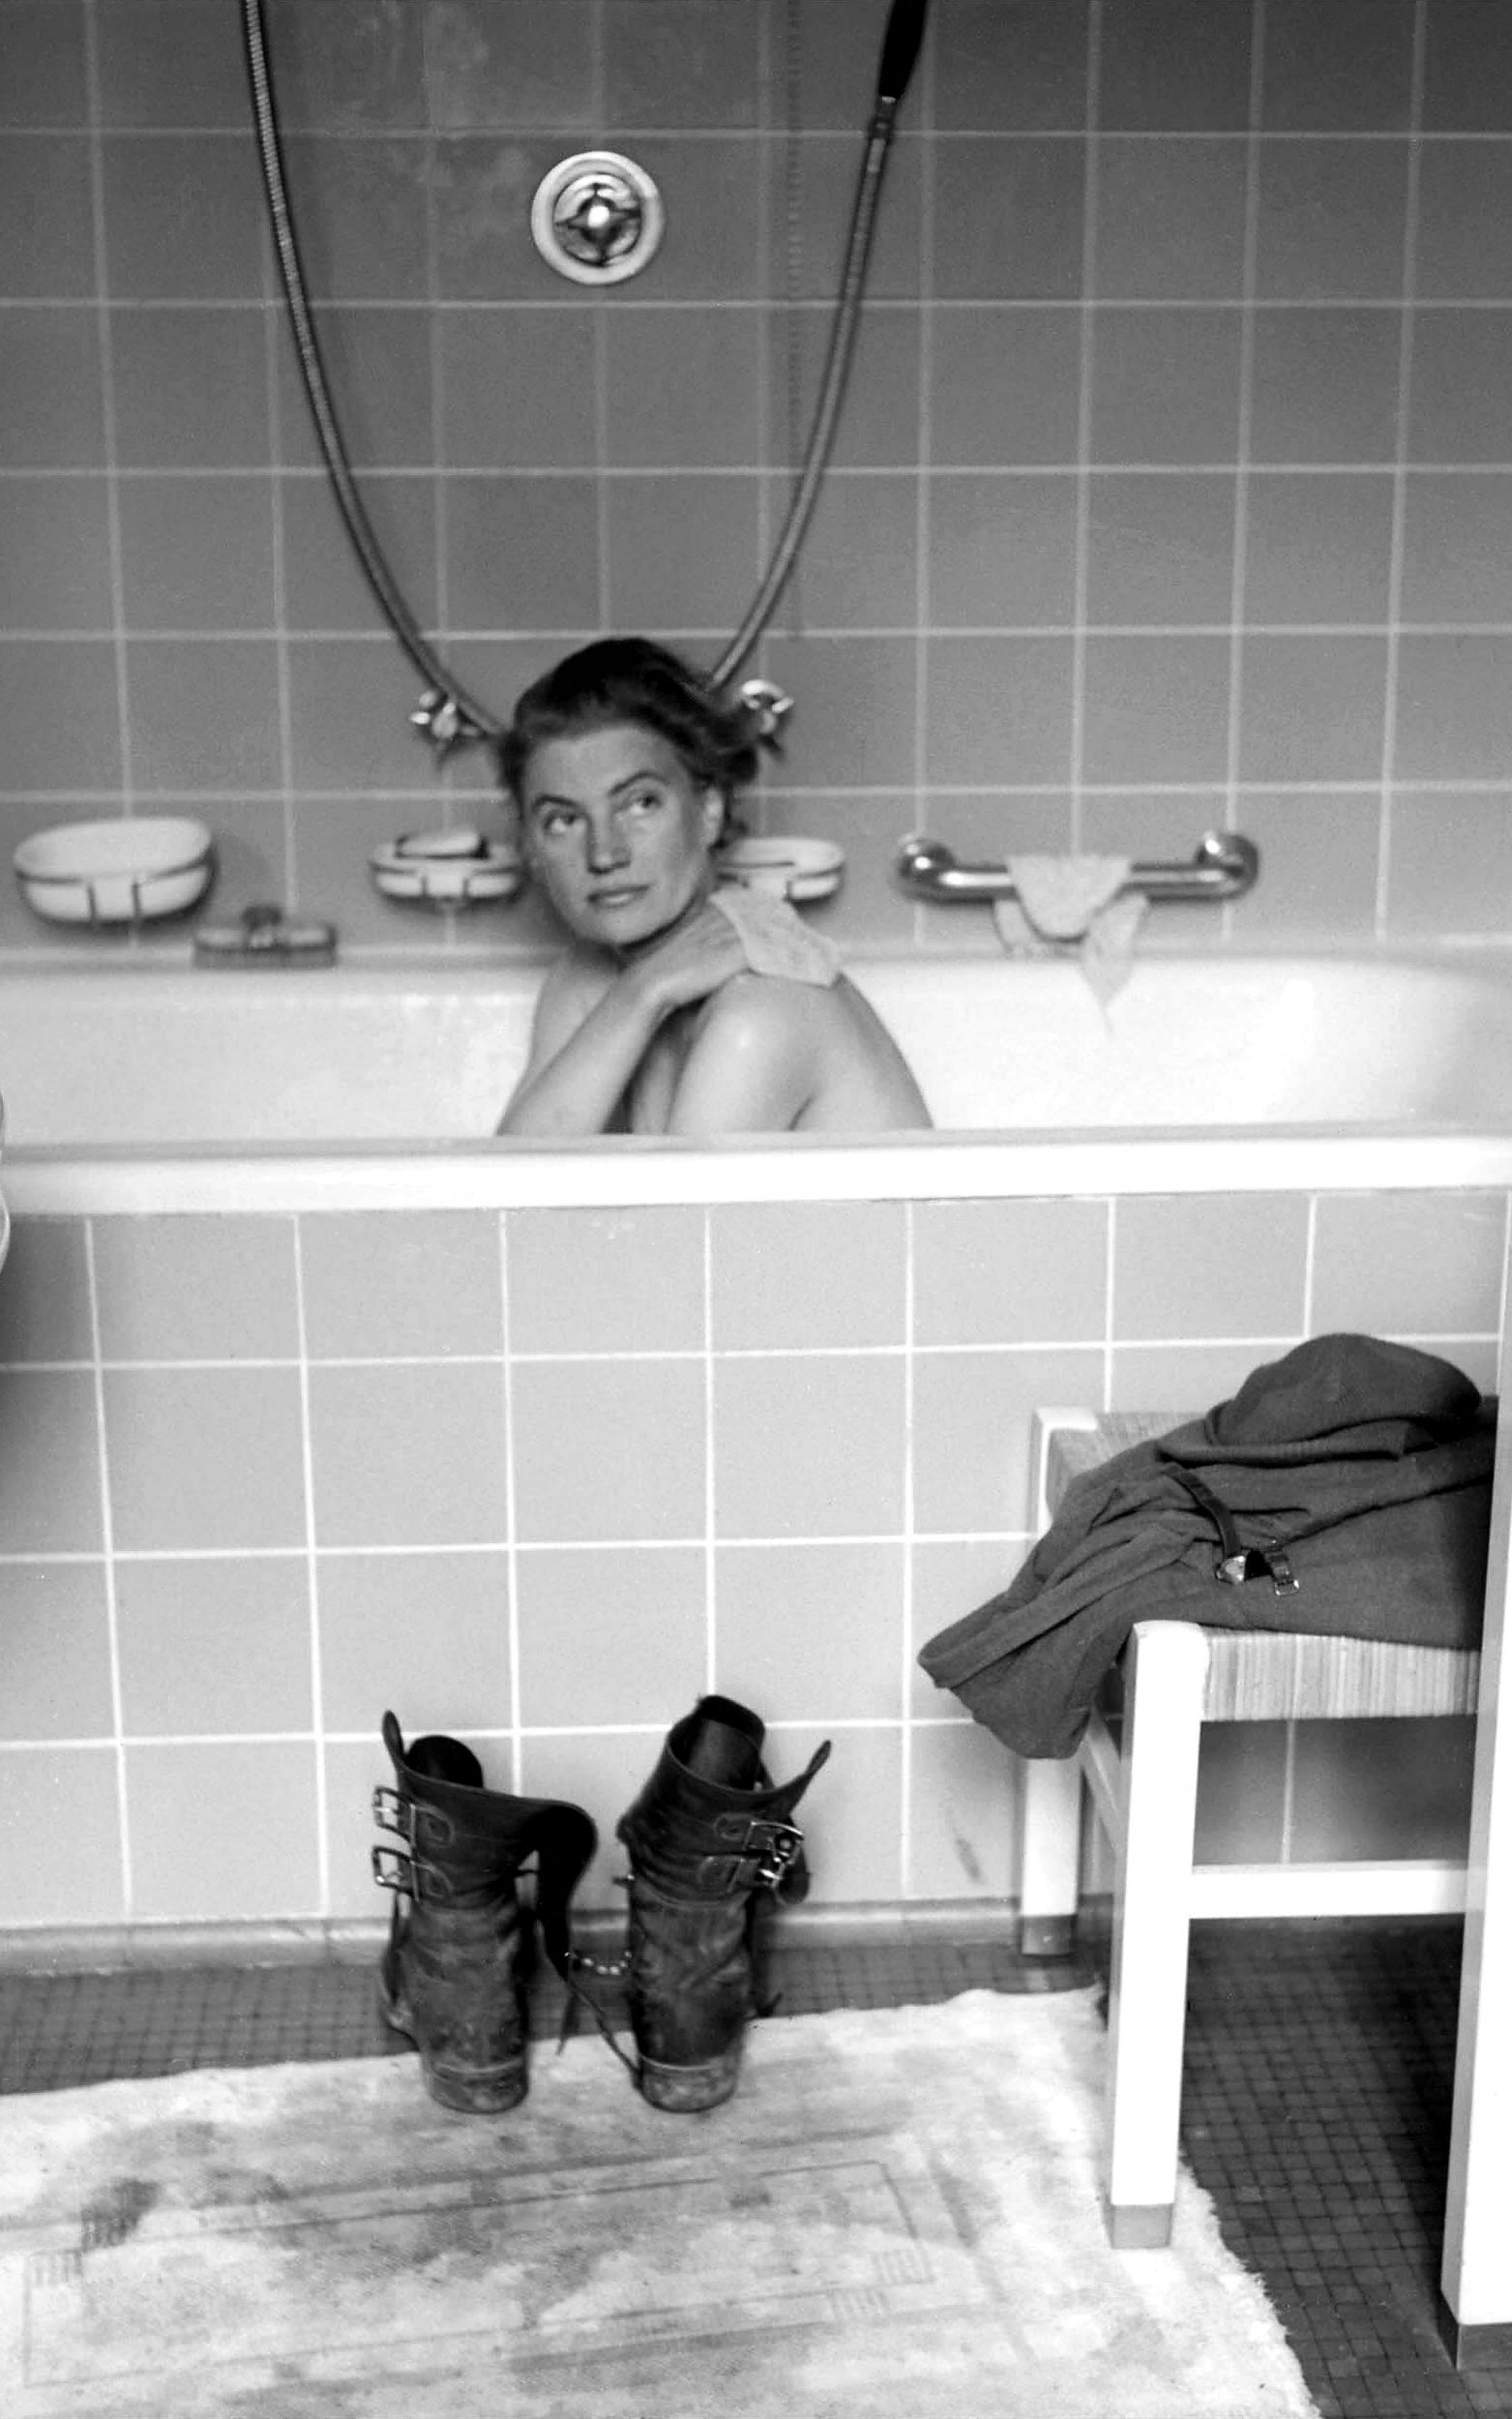 kate winslet stars as war photographer who washed in hitler’s bath